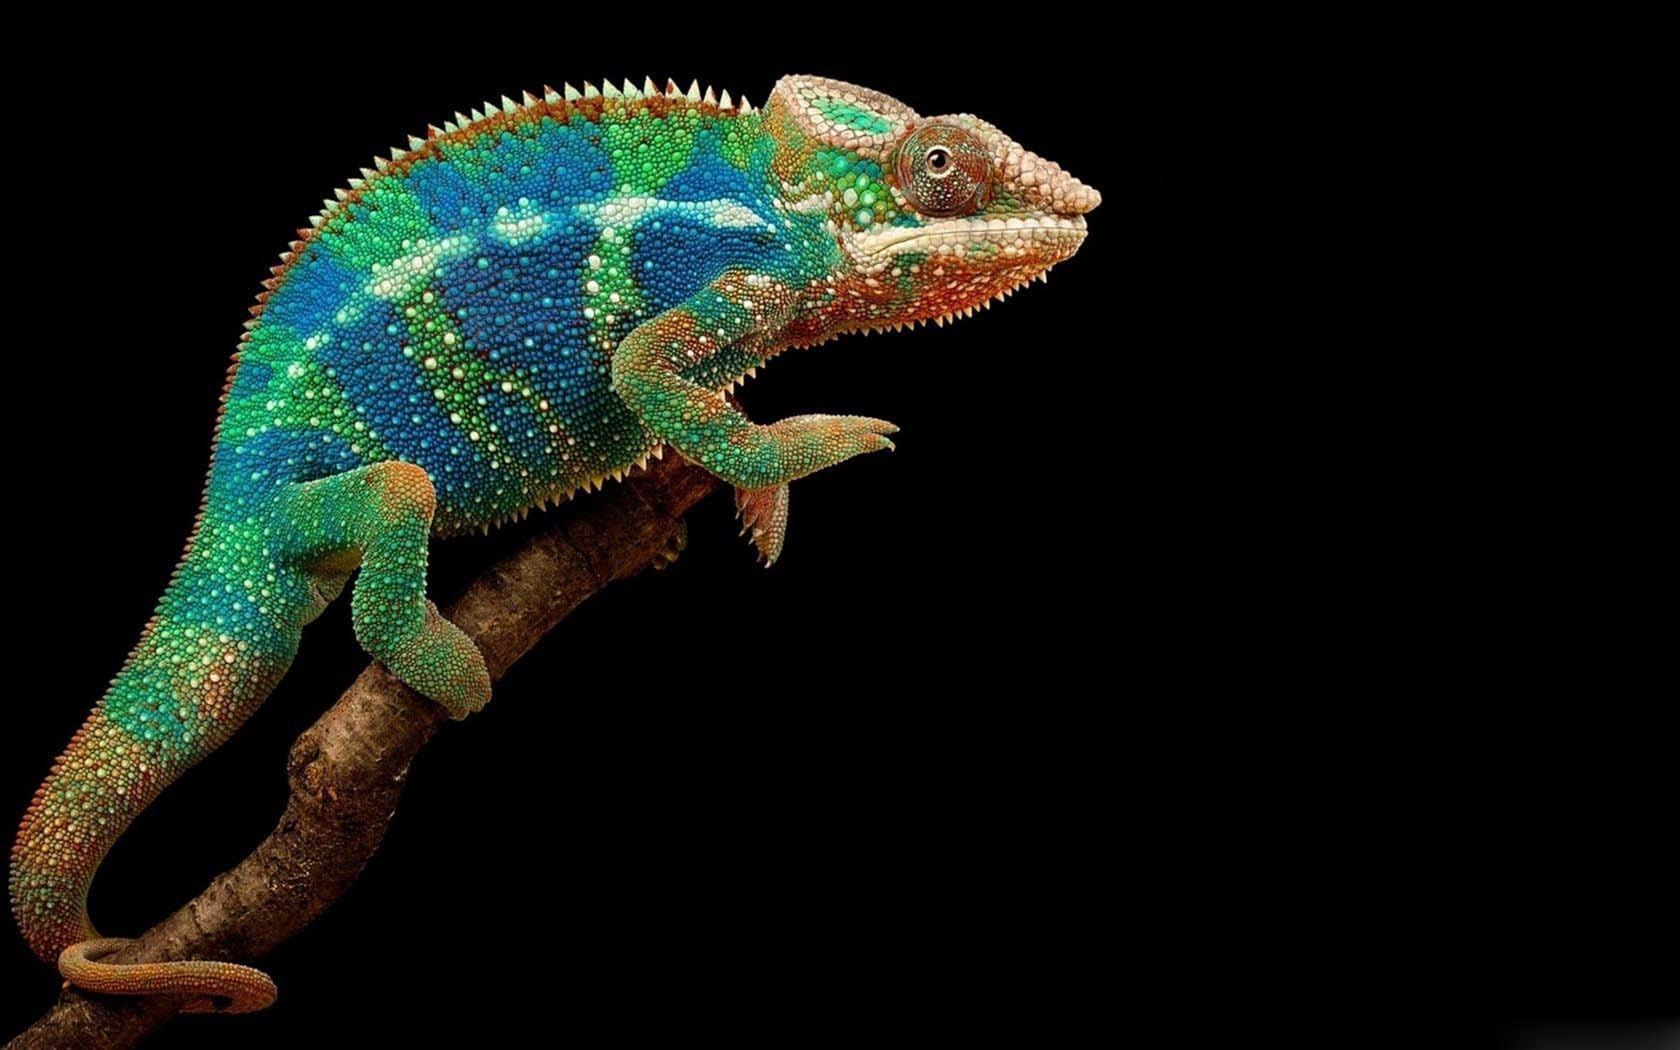 Panther Chameleon Wallpapers Hd - Does A Chameleon Change Its Colour - HD Wallpaper 